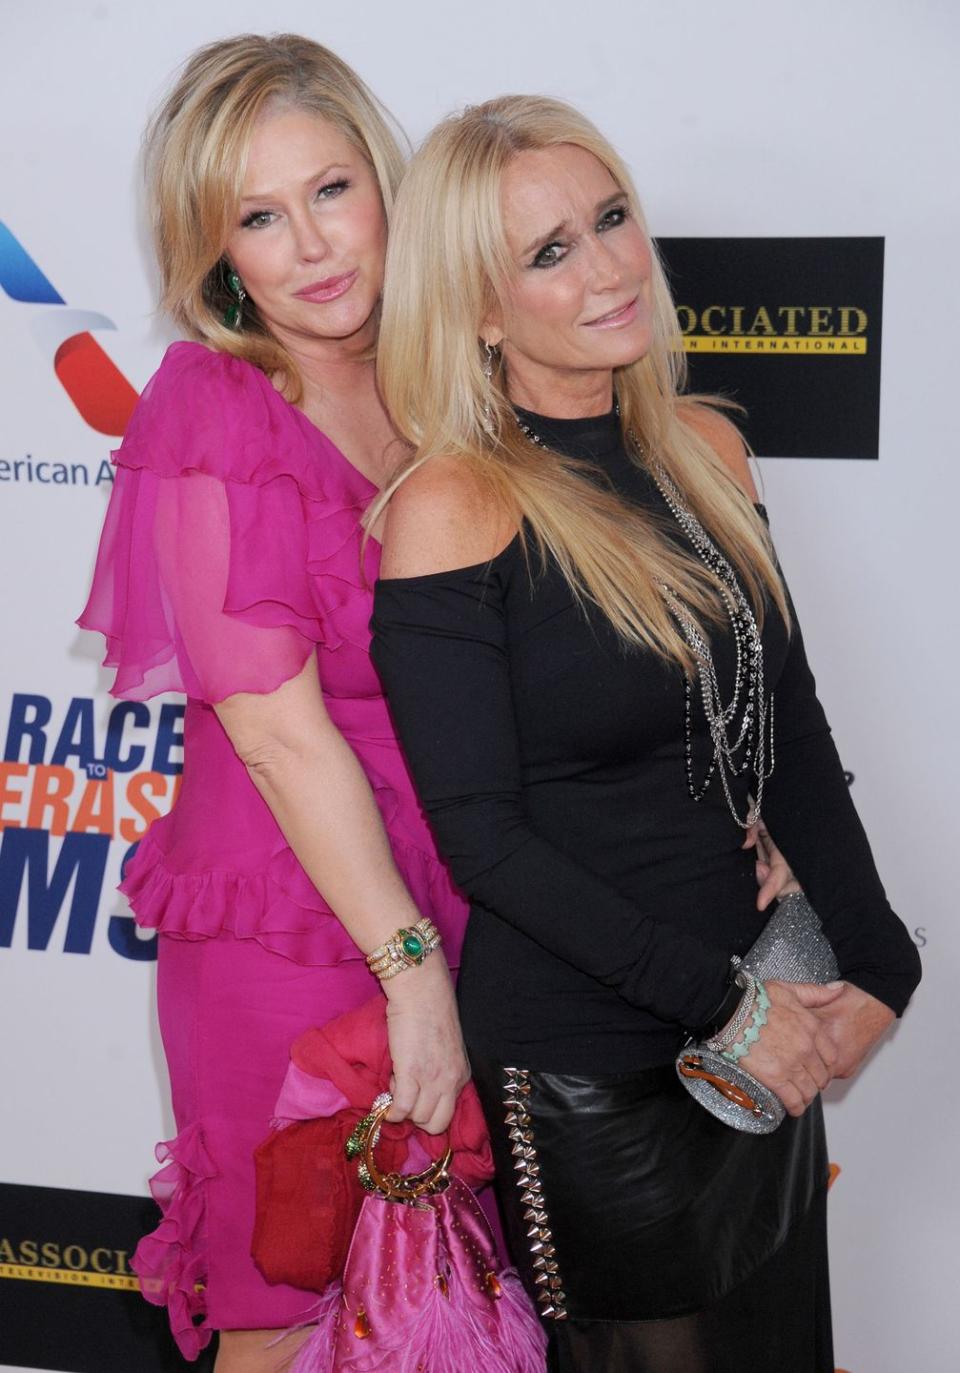 <p>Kathy Hilton is the oldest of the Richards sisters (their third sister is <em>Real Housewives of Beverly Hills </em>star Kyle Richards) and we see the most similarities between her and former child actress, Kim. From their nose shape to their coloring, the two are nearly identical despite being six years apart. </p>